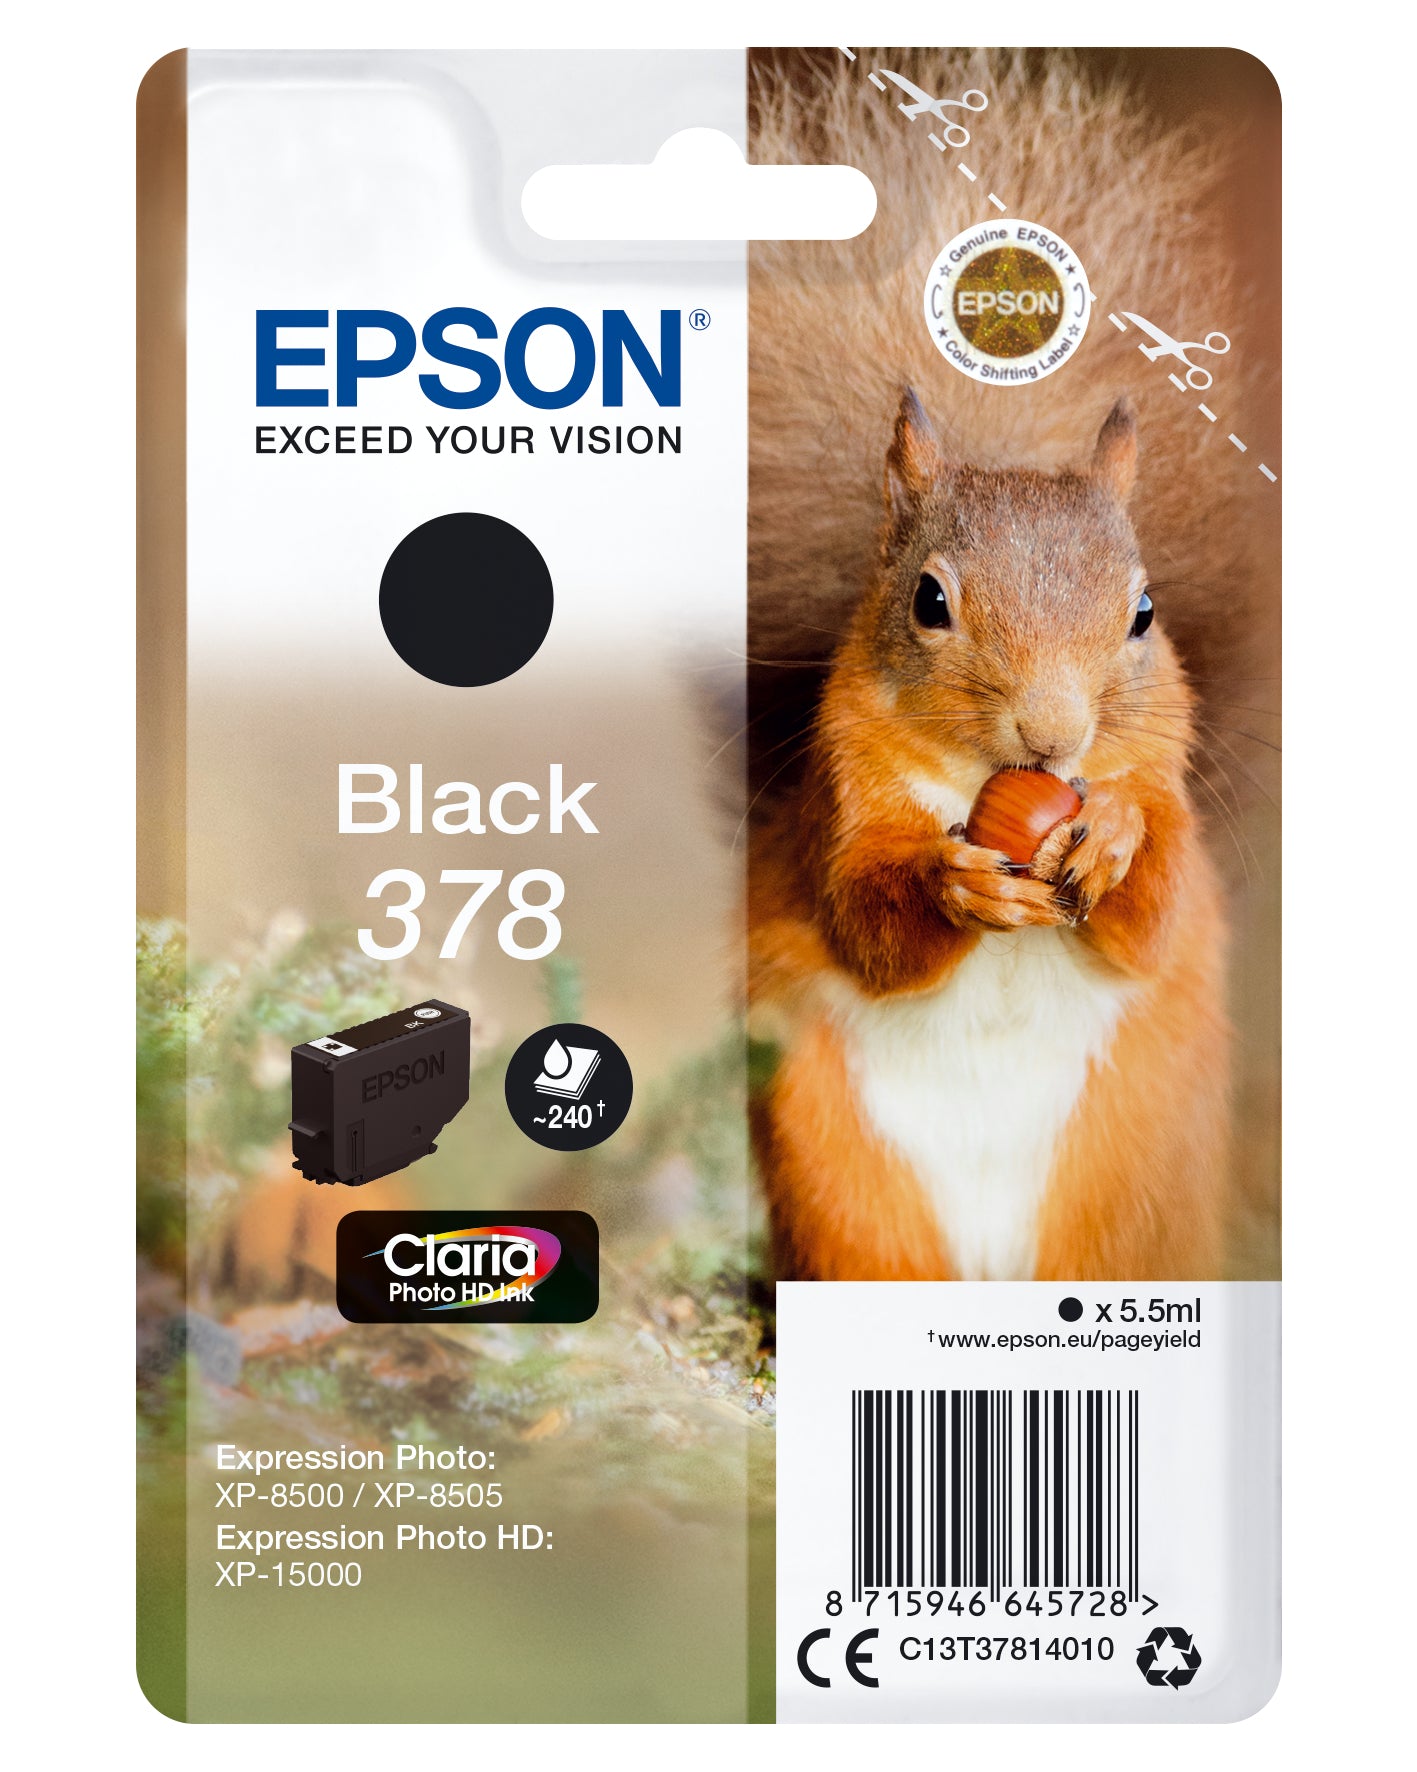 Epson C13T37814010/378 Ink cartridge black, 240 pages 5.5ml for Epson XP 15000/8000